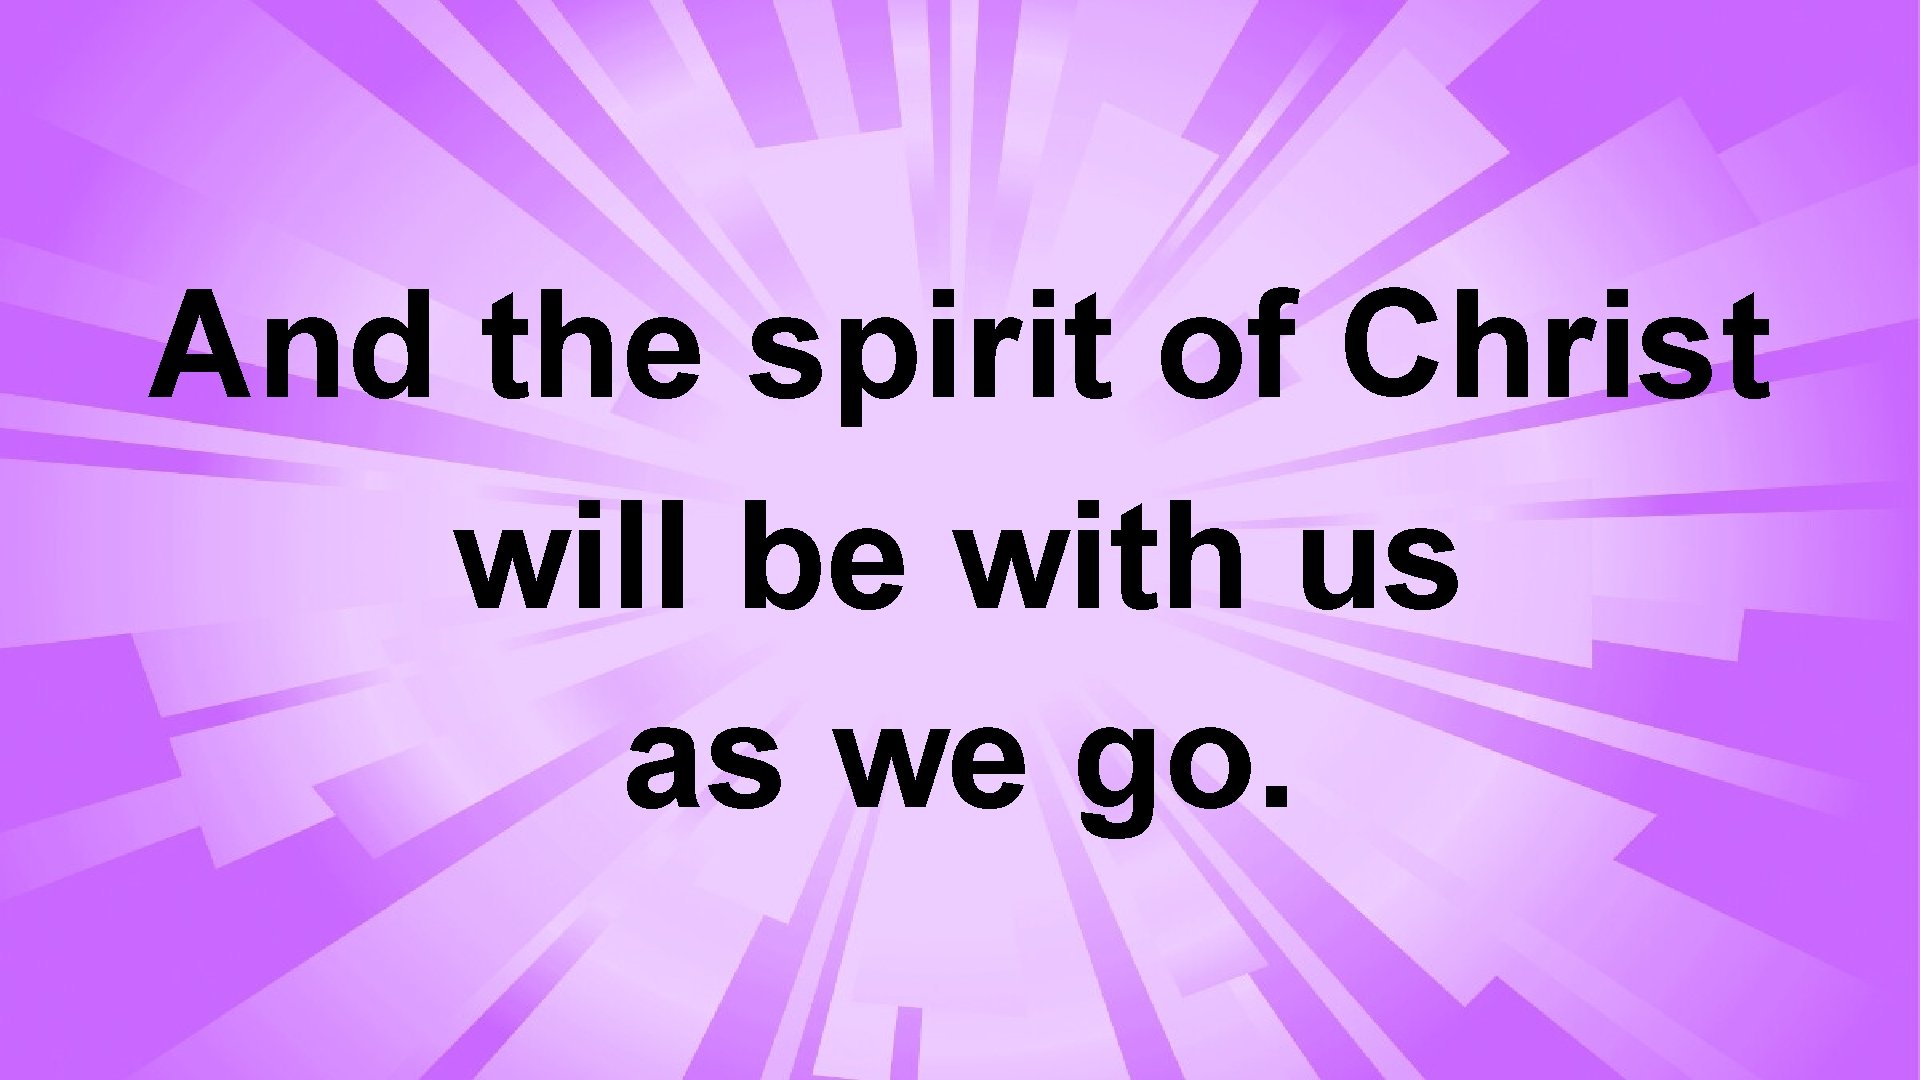 And the spirit of Christ will be with us as we go. 